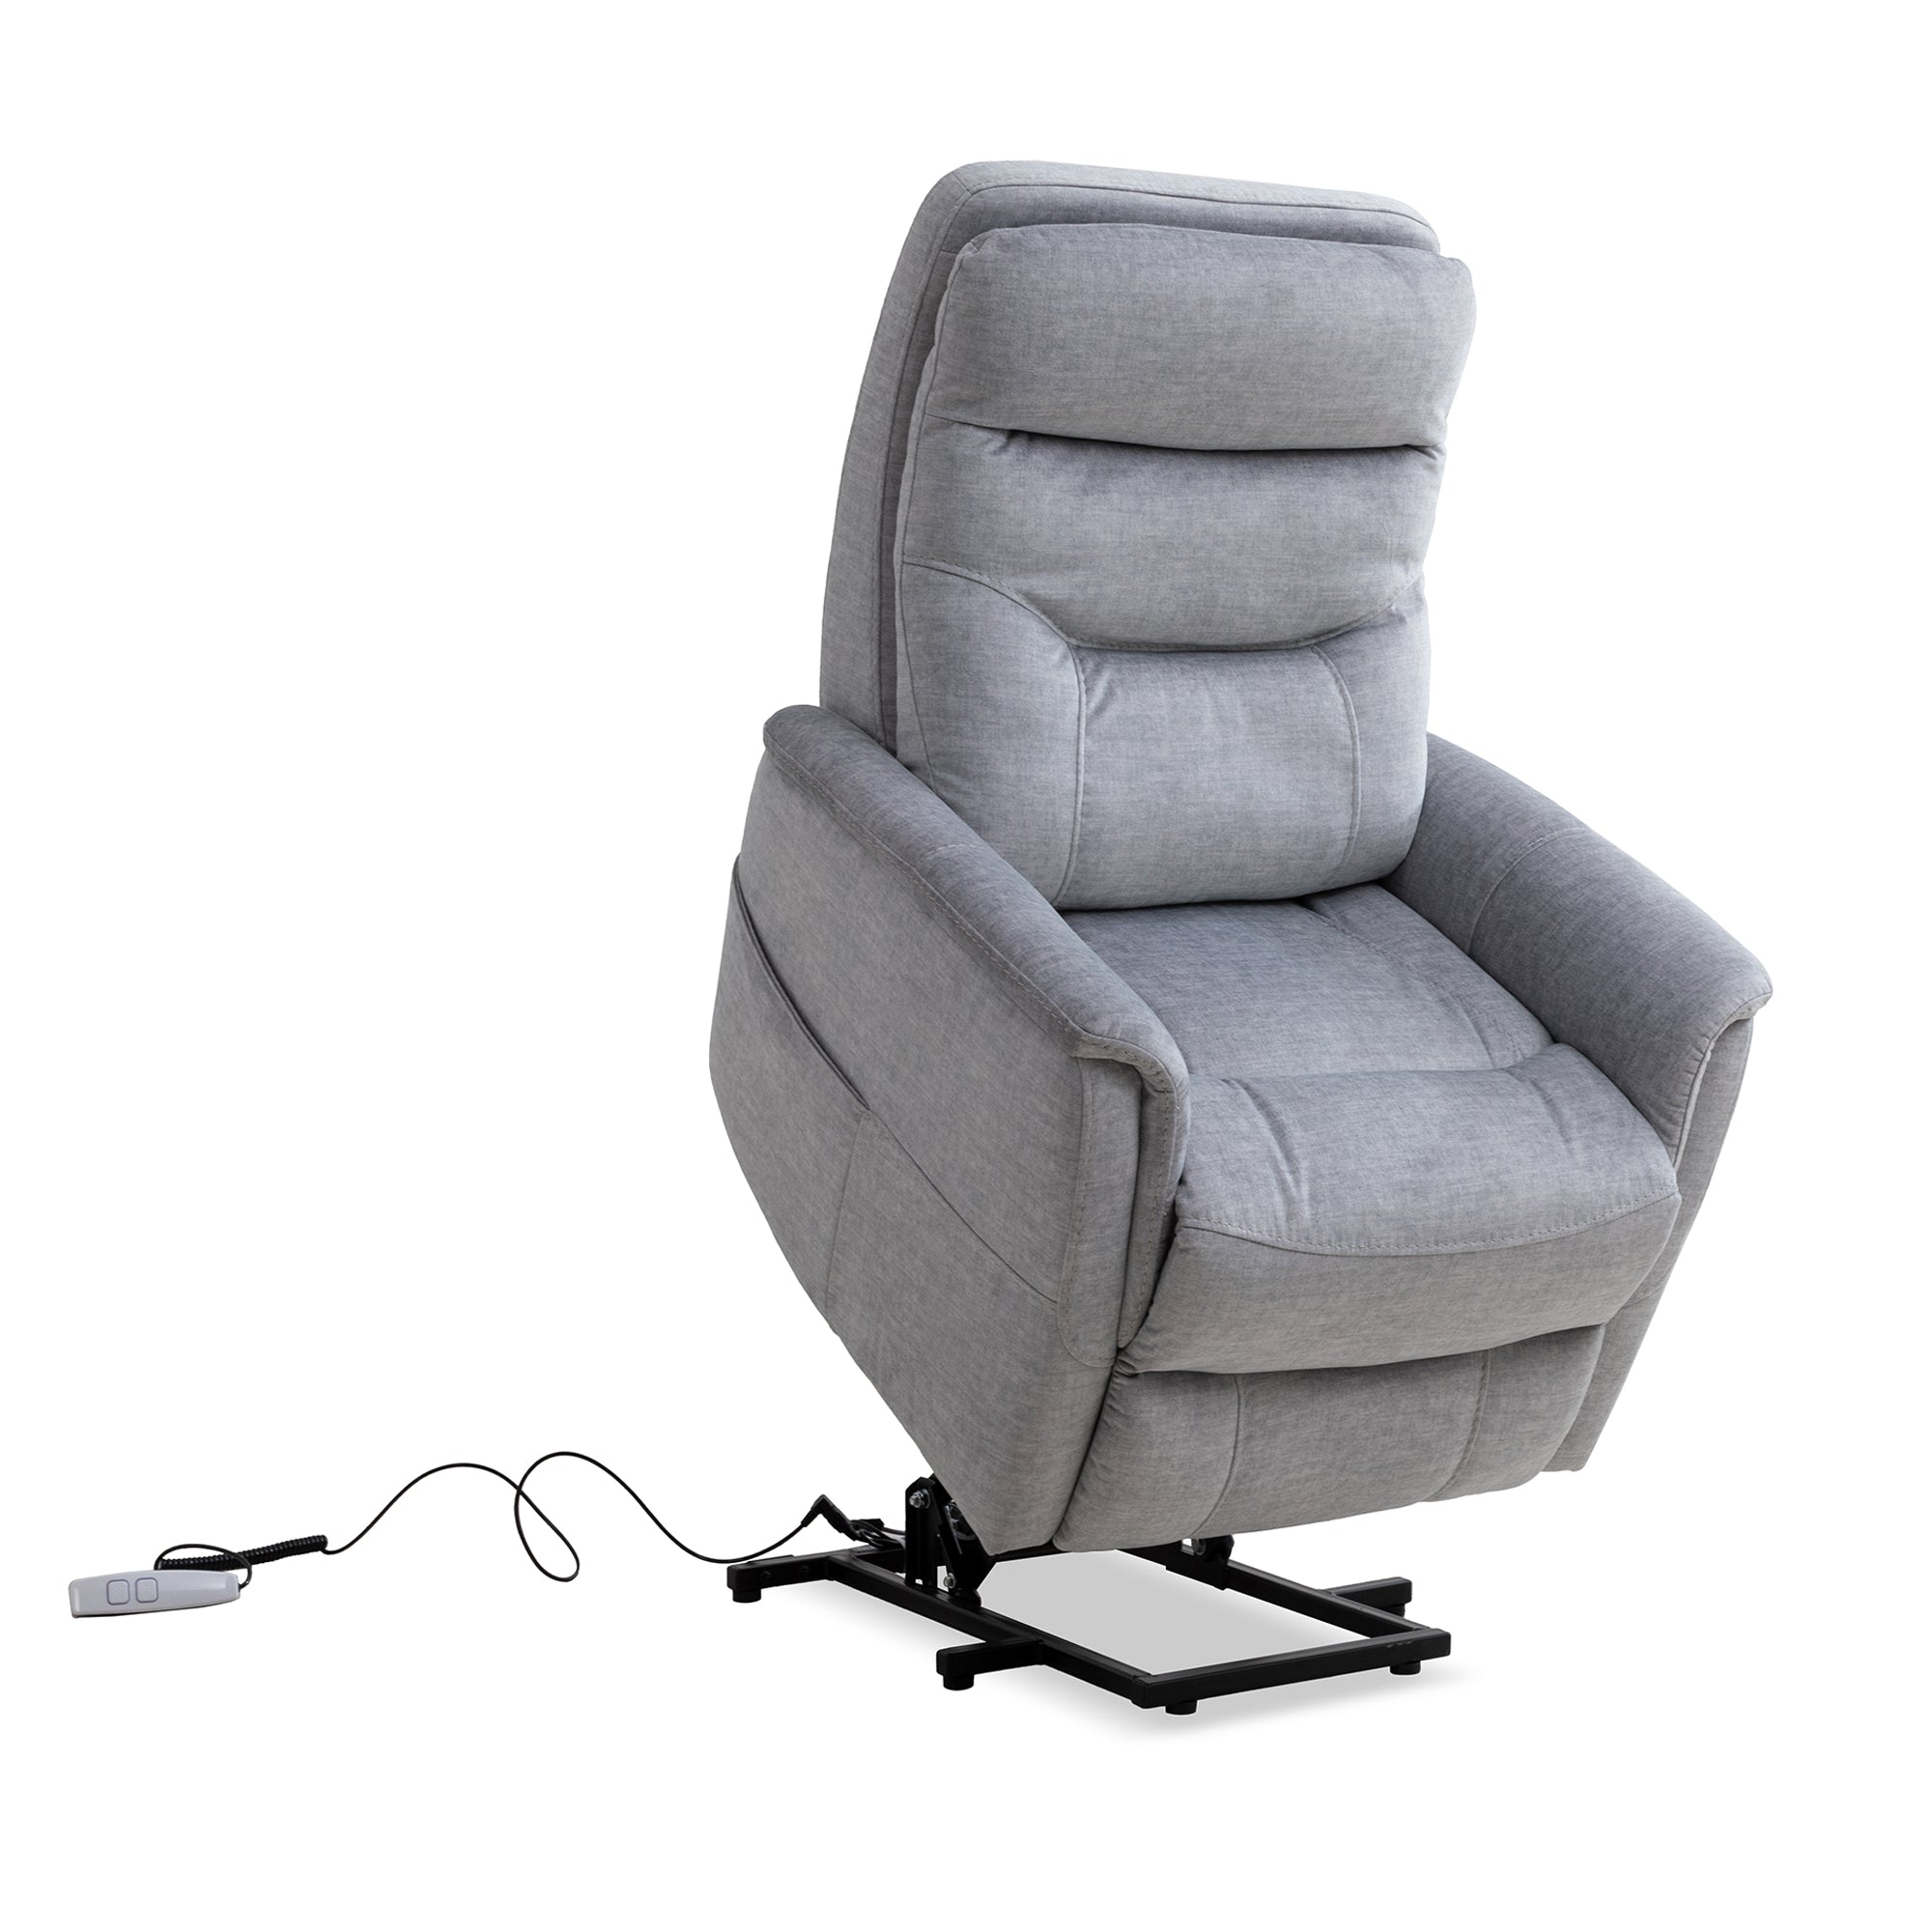 Gemini Power Recliner Lift Chair in Capri Siliver by Parker House